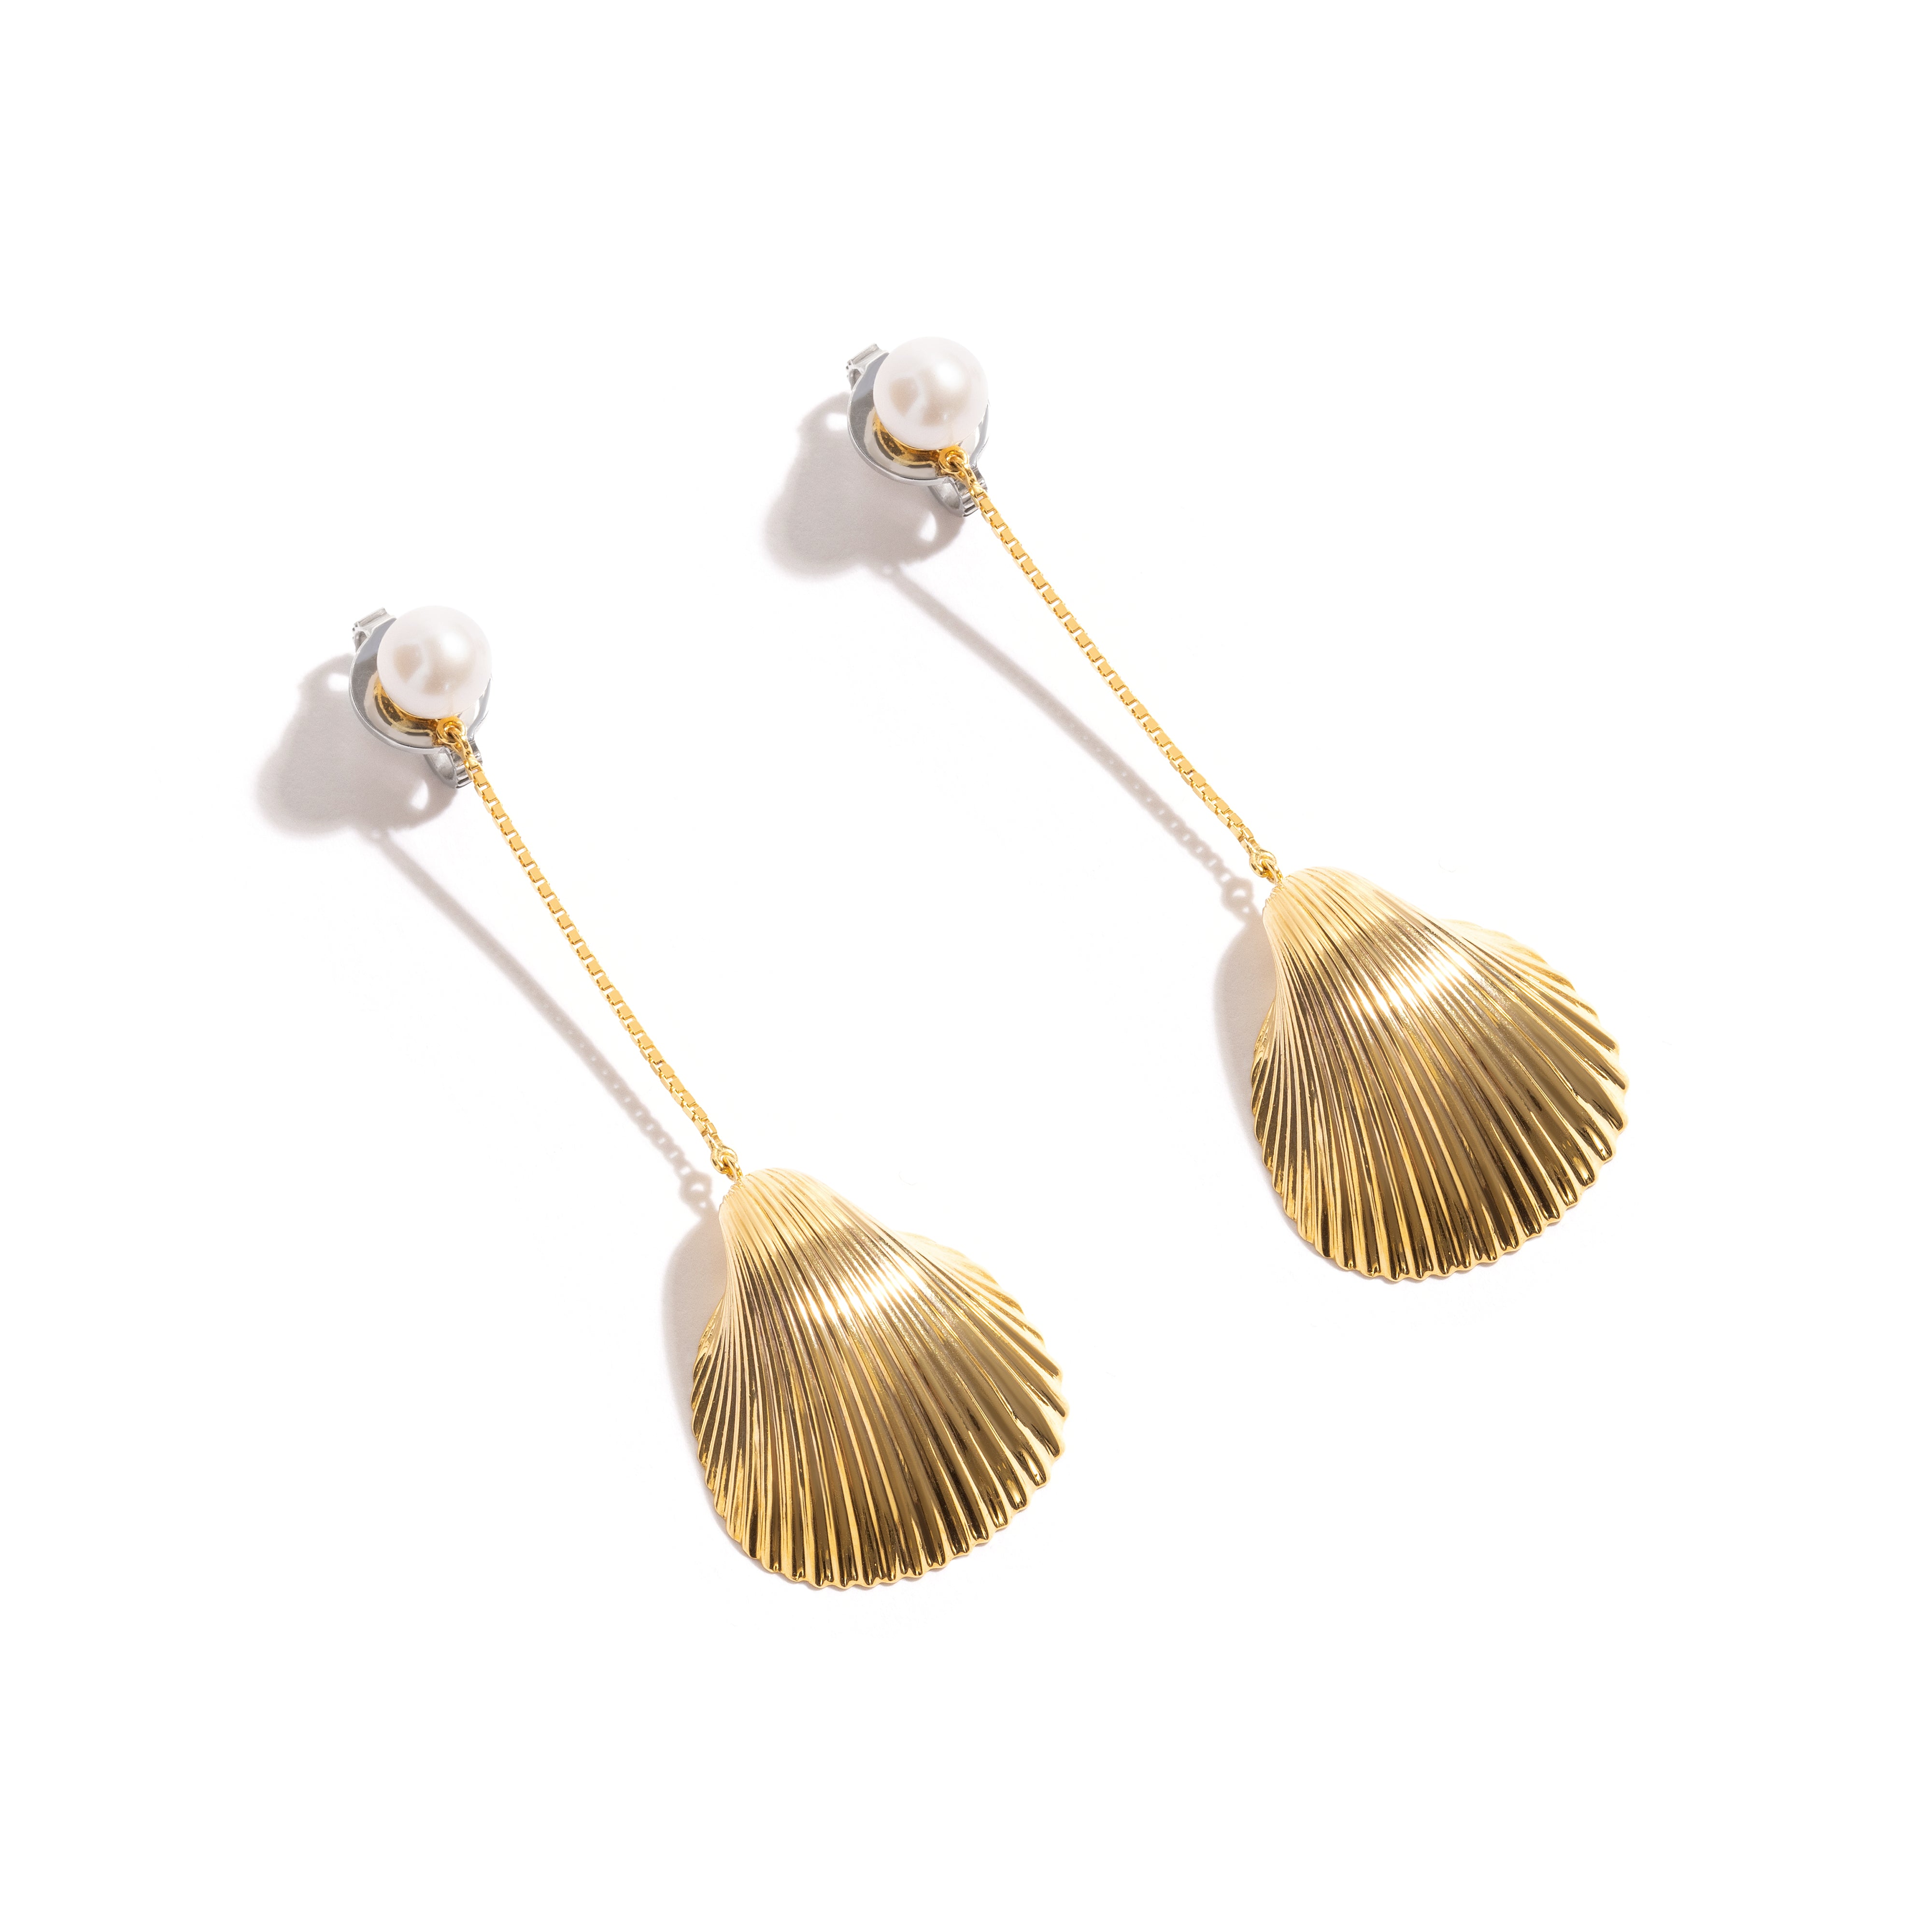 MARE PERLA EARRING IN 18K YELLOW GOLD PLATED SILVER AND PEARL